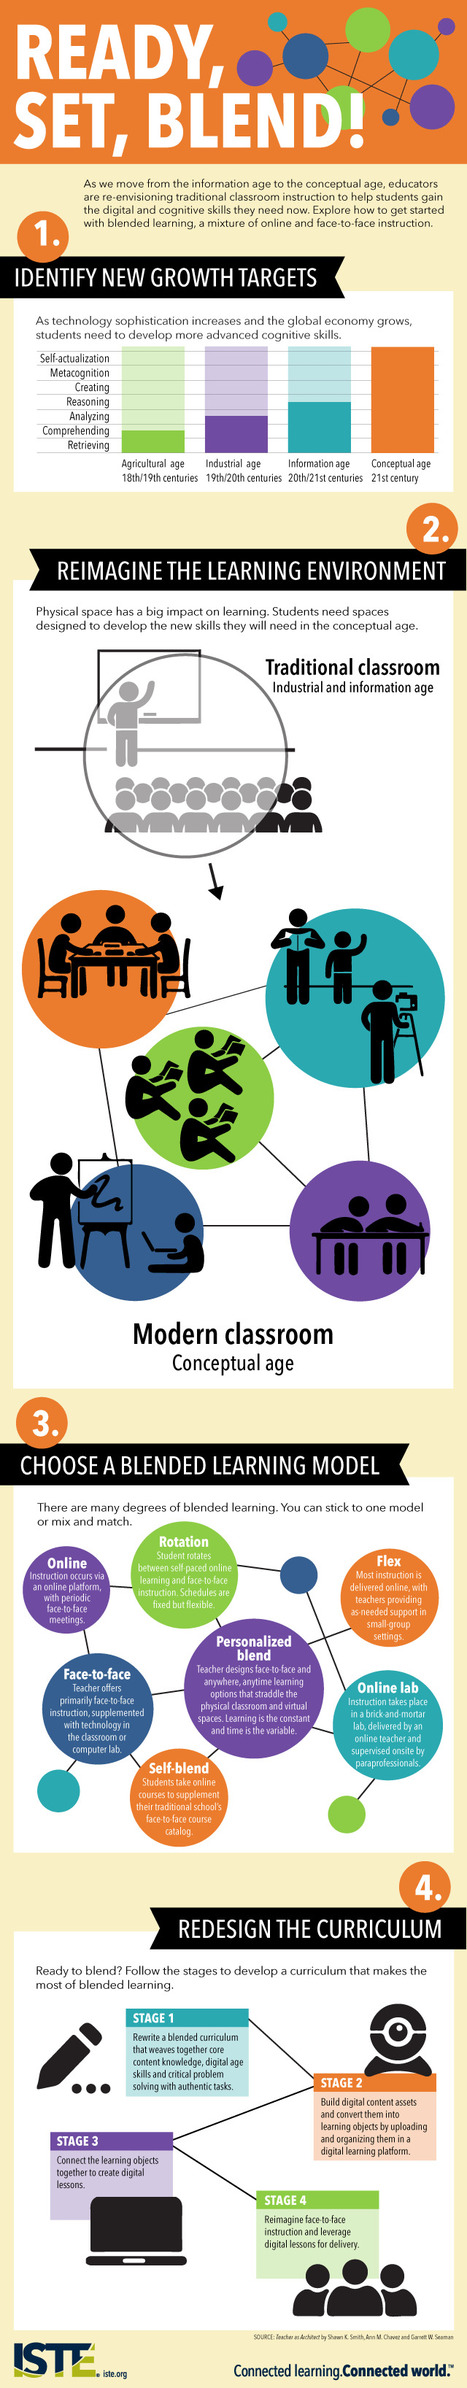 ISTE Infographic: Ready, set, blend! | :: The 4th Era :: | Scoop.it